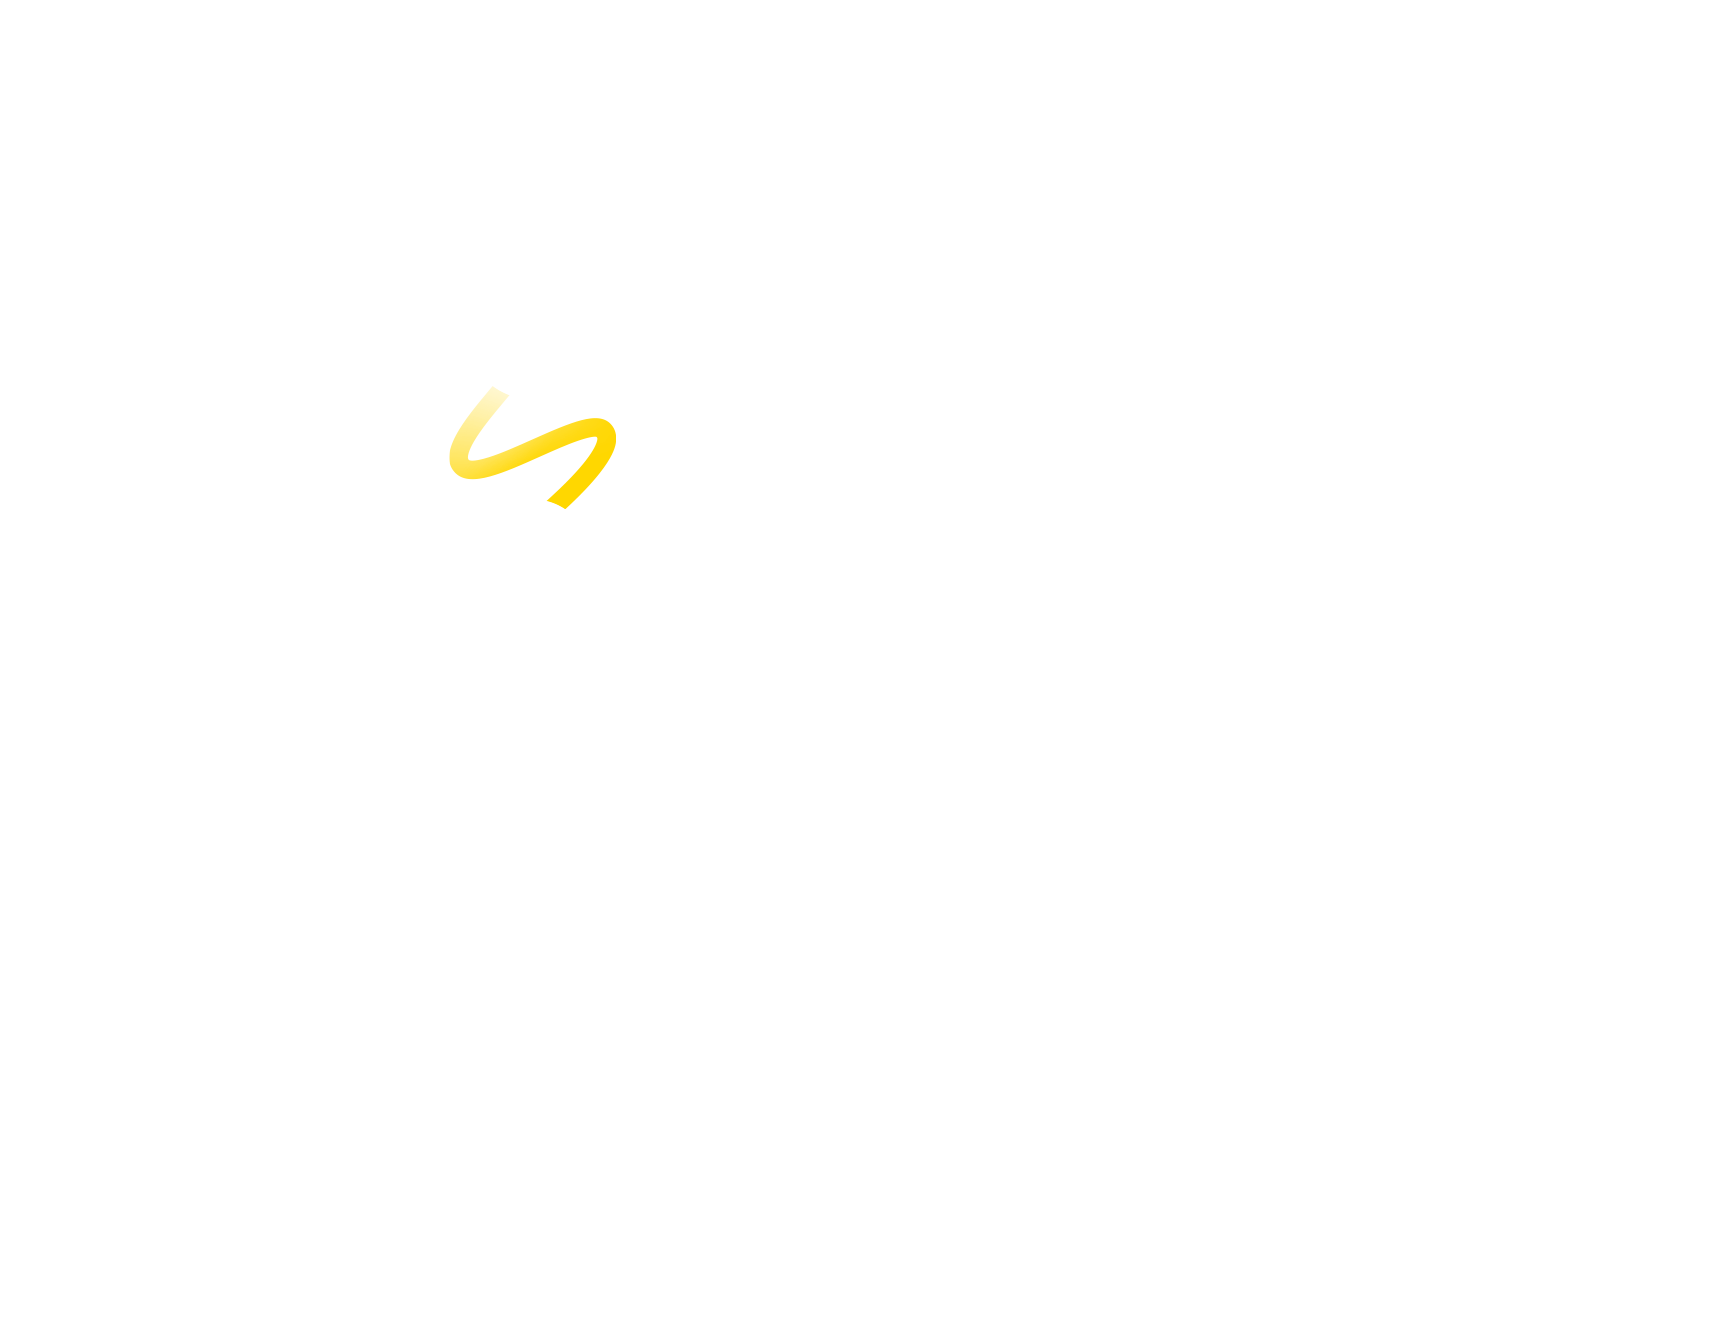 Movies born thanks to a financial contribution of innogy